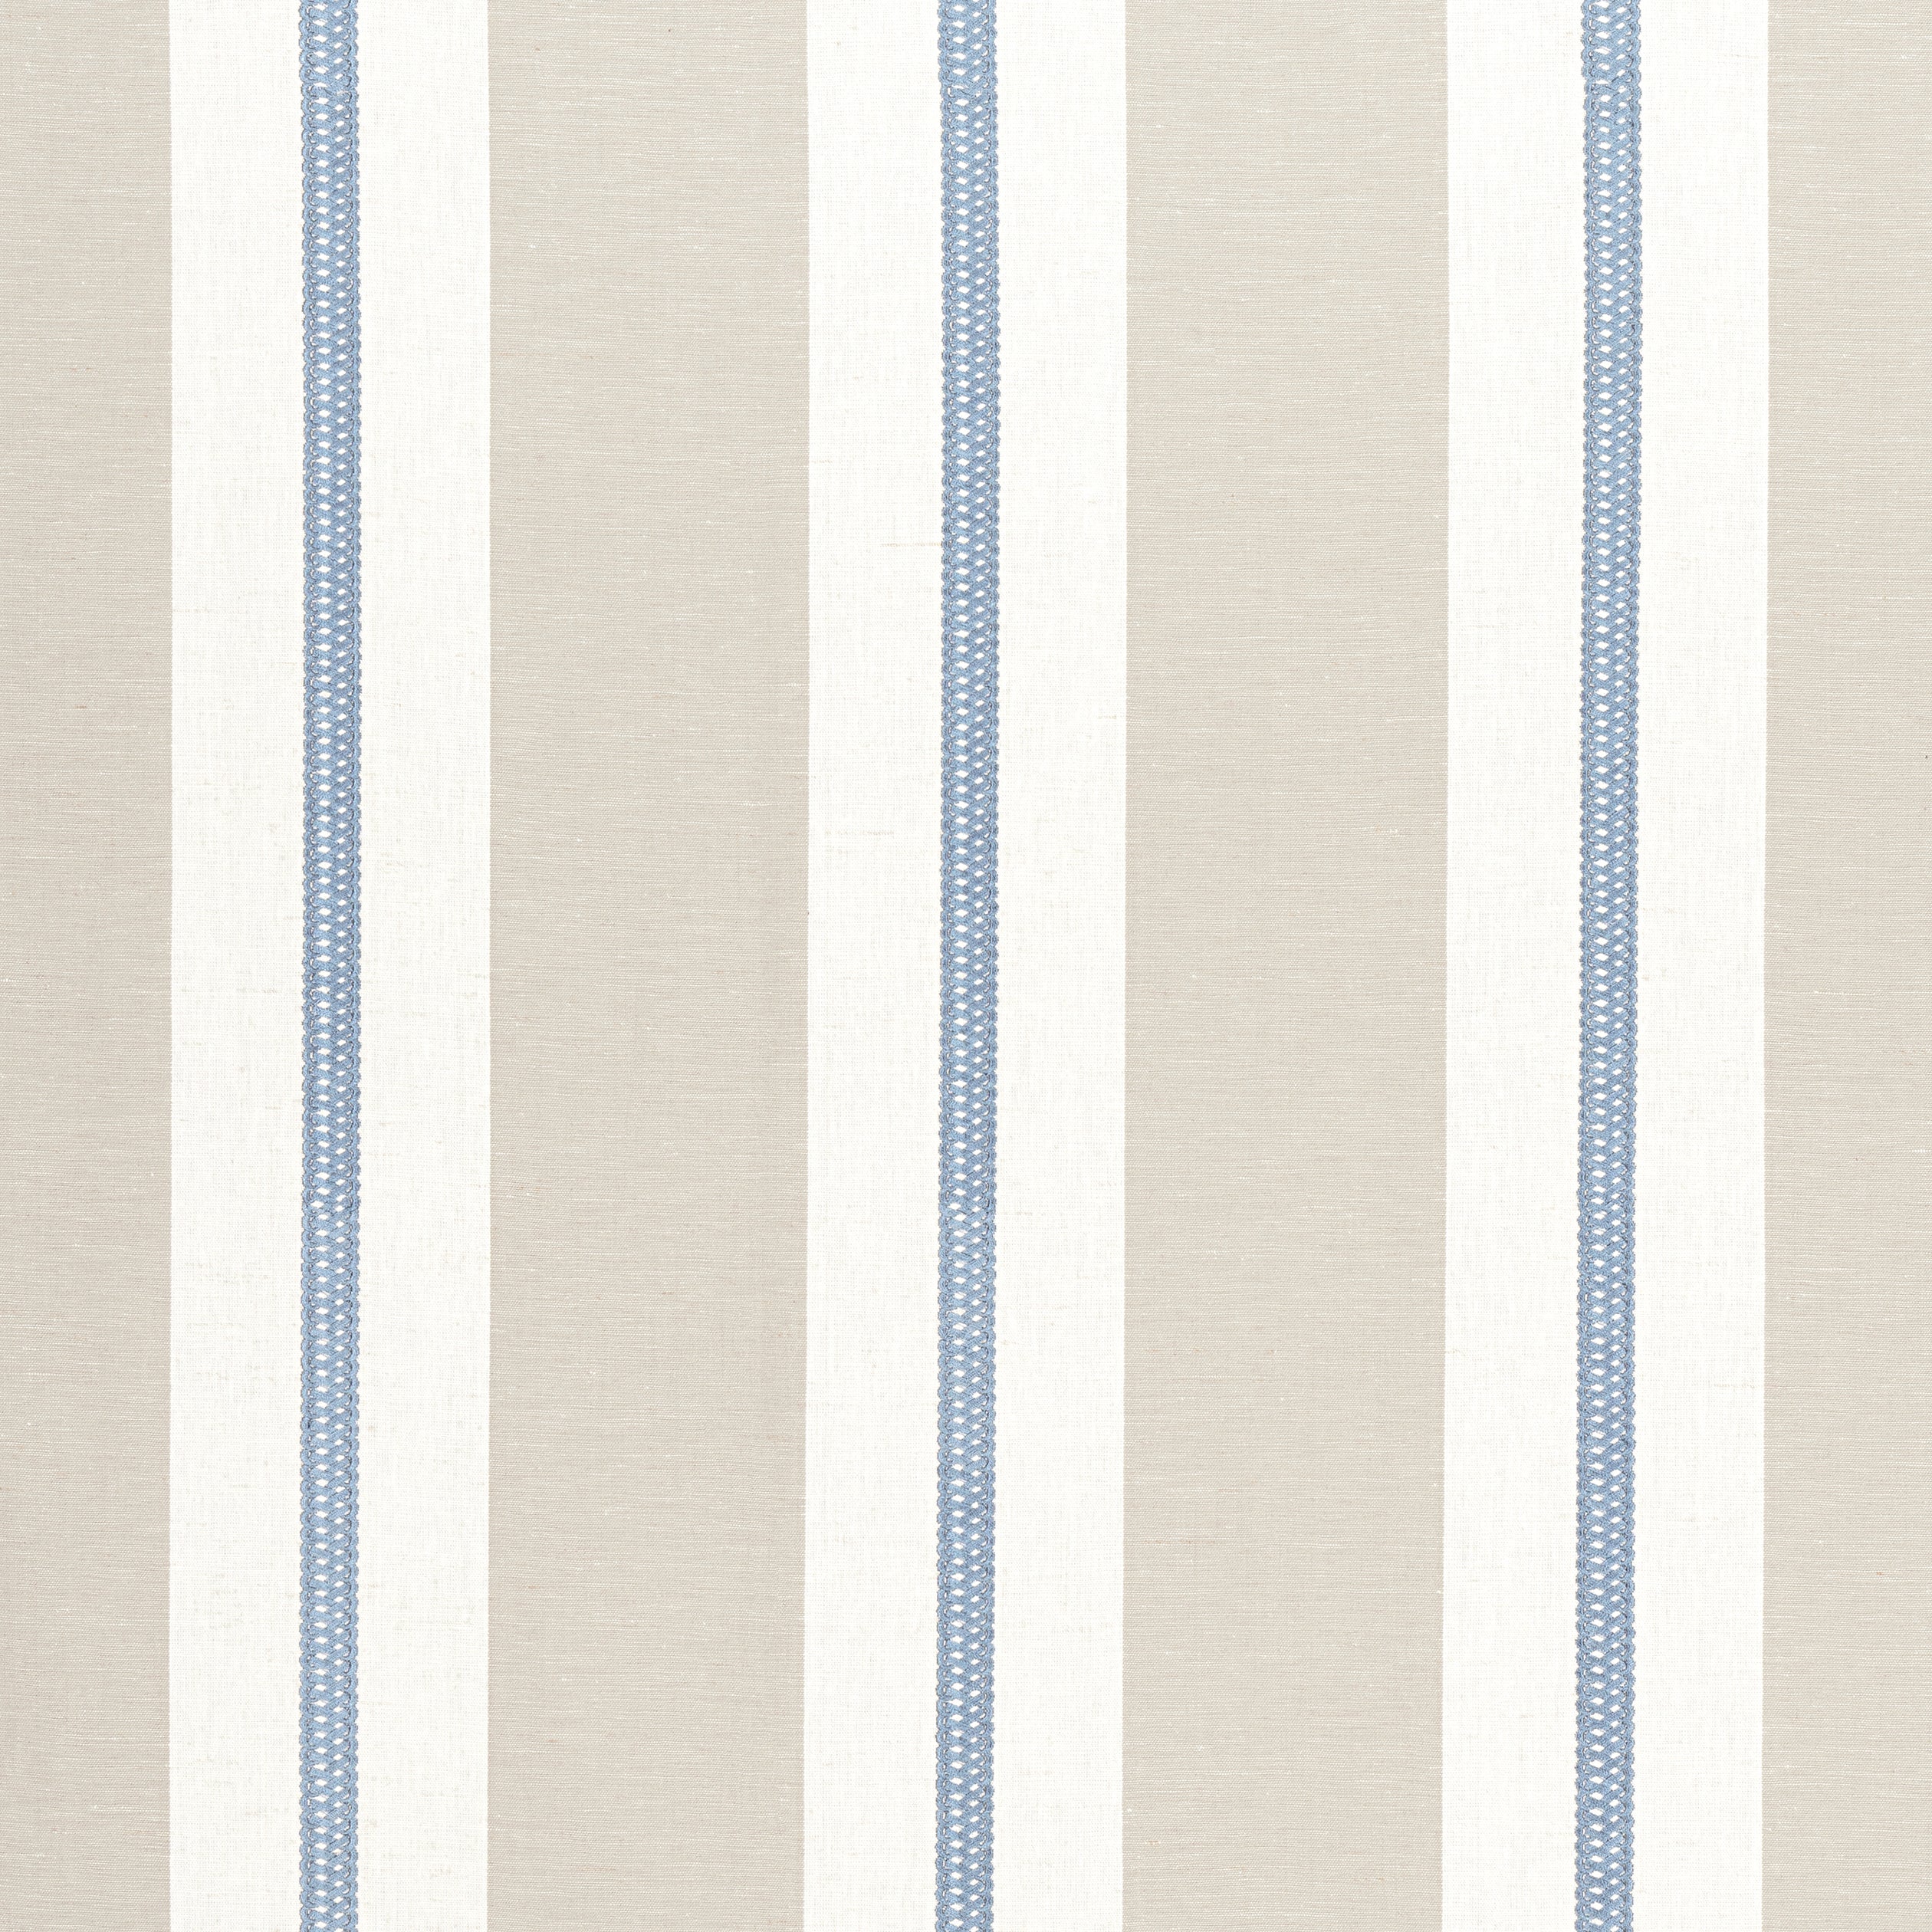 Alden Stripe Embroidery fabric in Sky color - pattern number AW24531 - by Anna French in the Devon collection